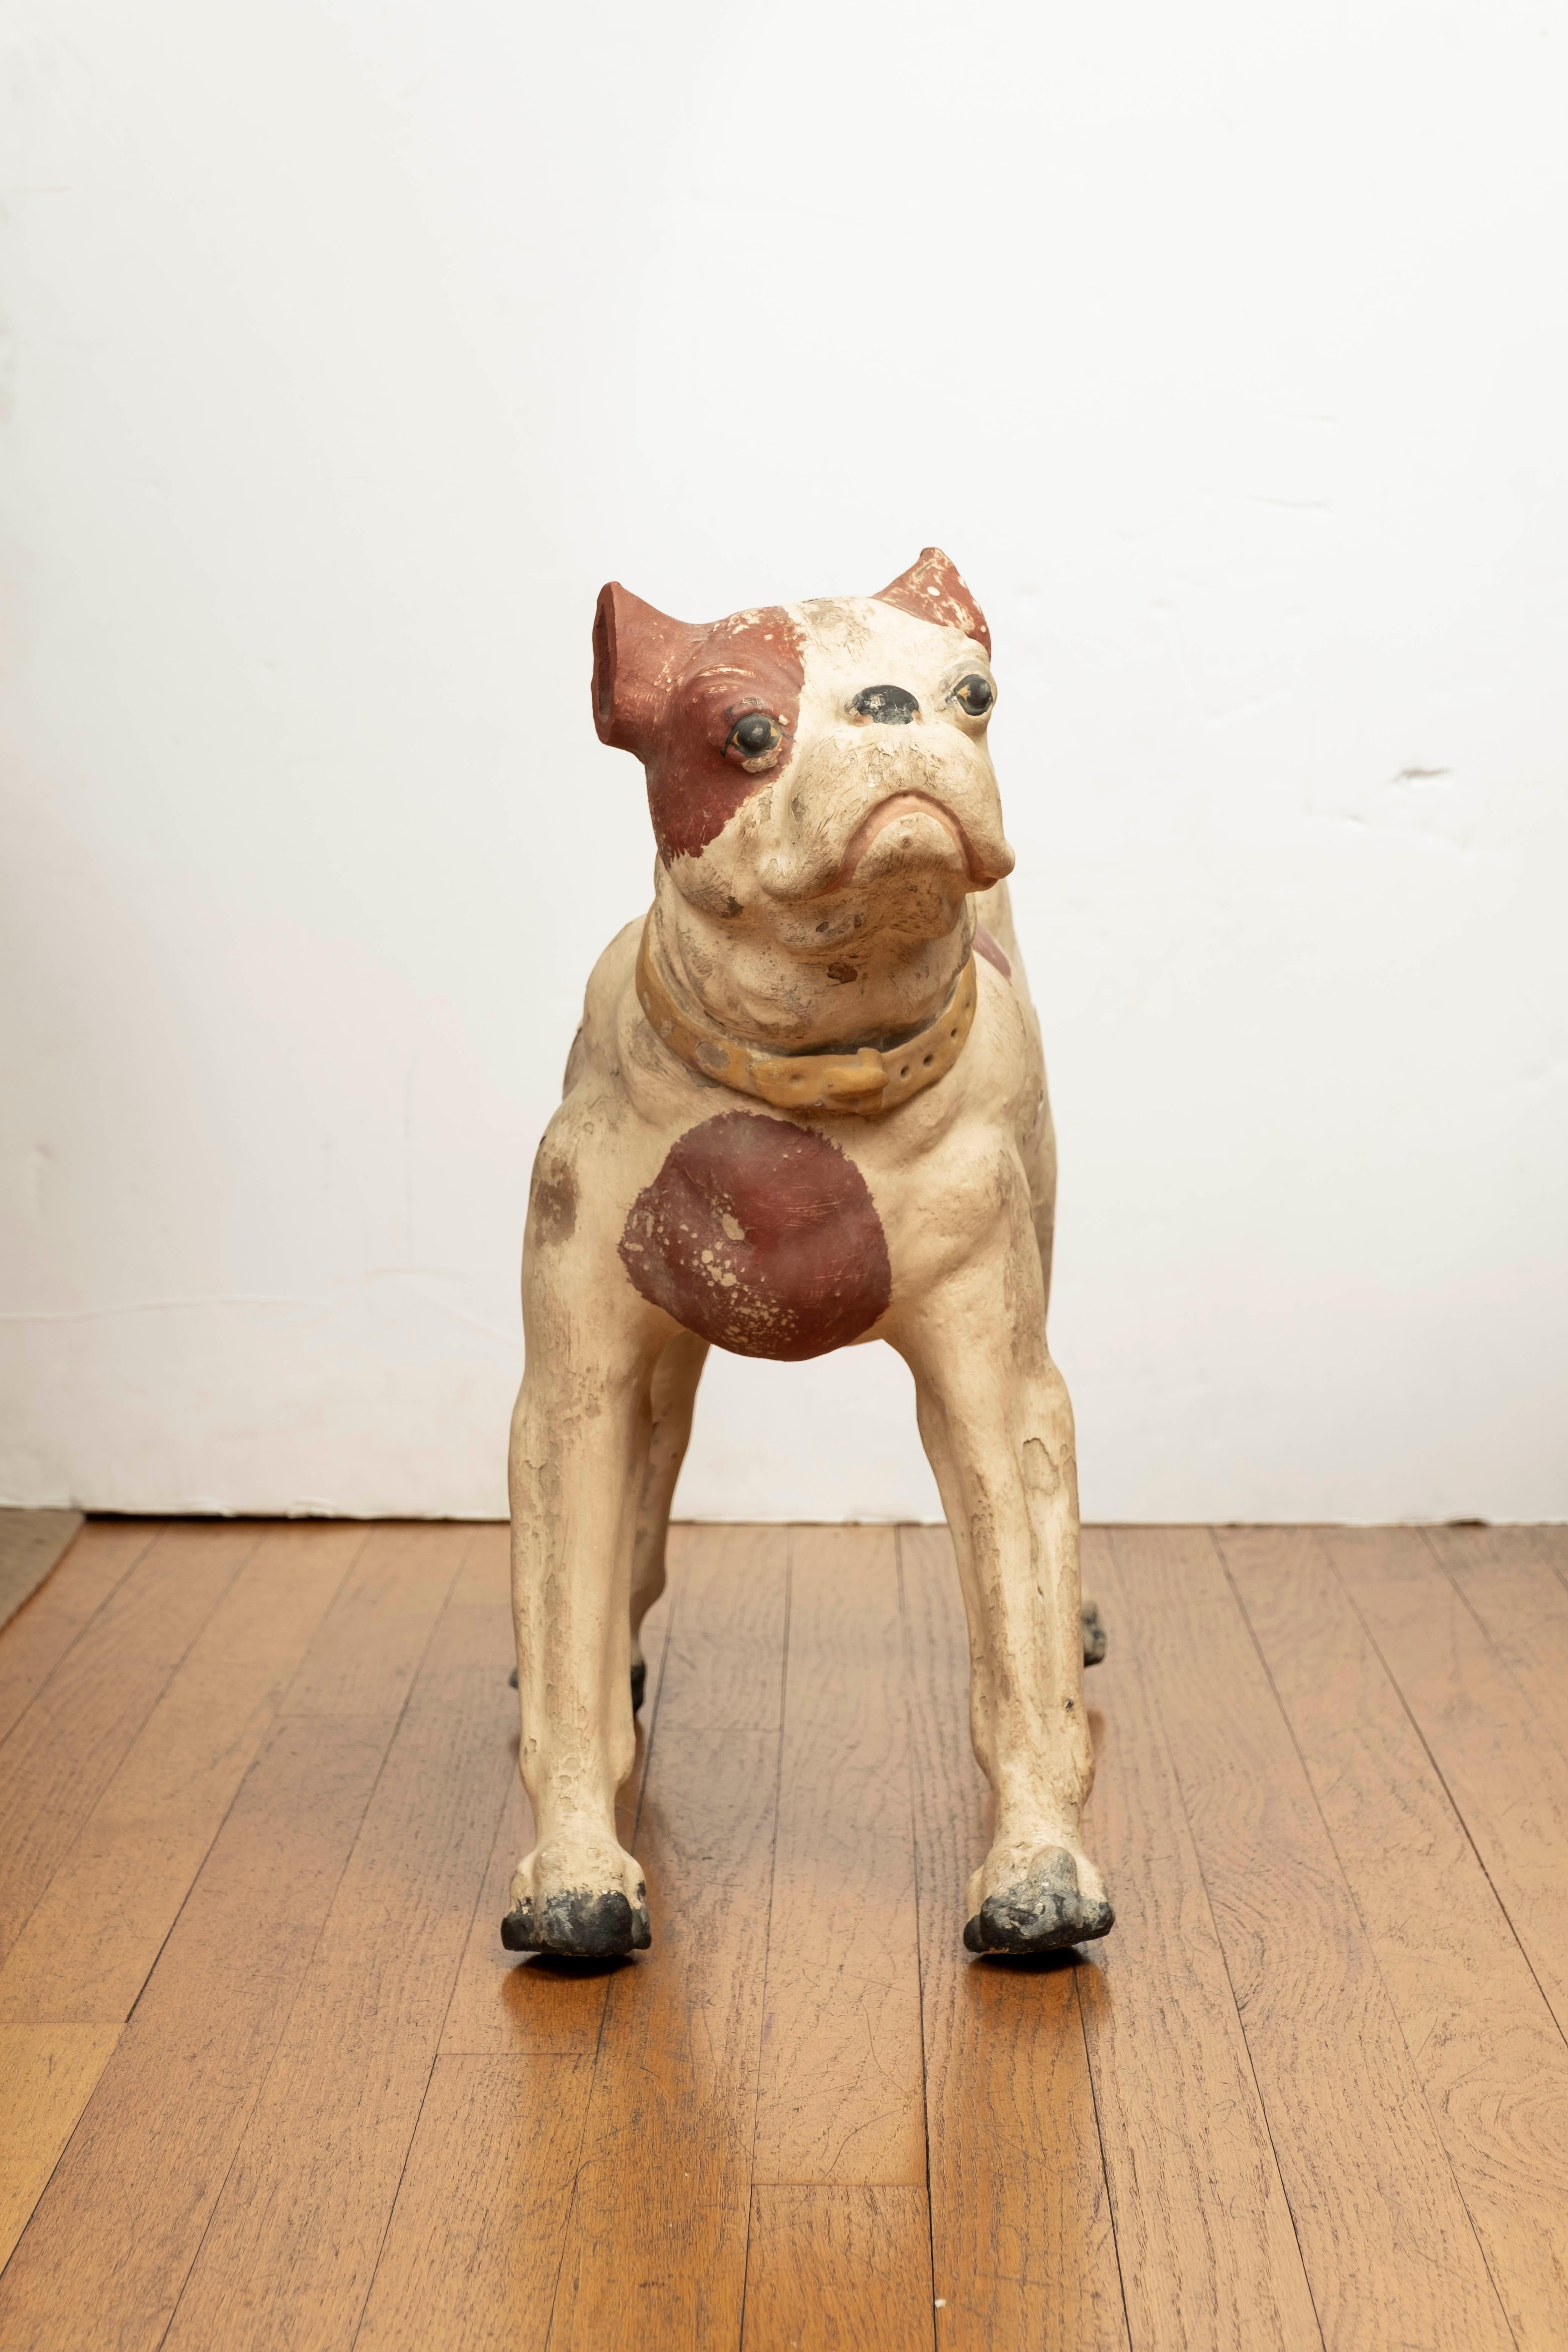 Vintage terracotta terrier sculpture. This handsome terra cotta terrier figure is realistic in size and features.
Perfect home accent for the dog lover!